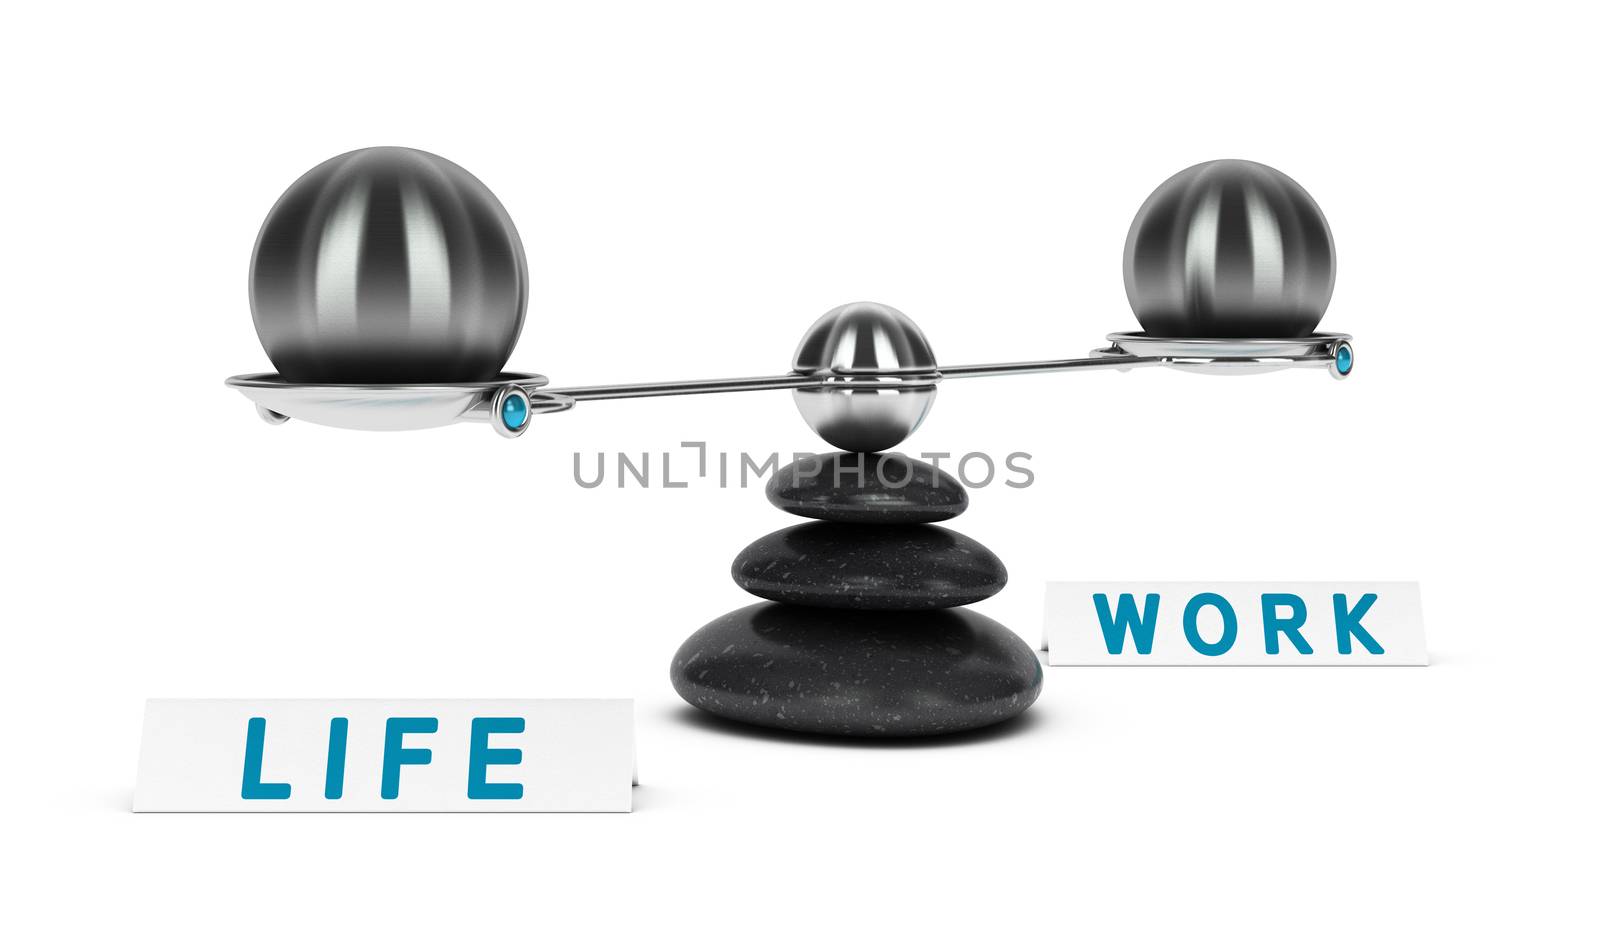 Work and Life Balance Dichotomy by Olivier-Le-Moal